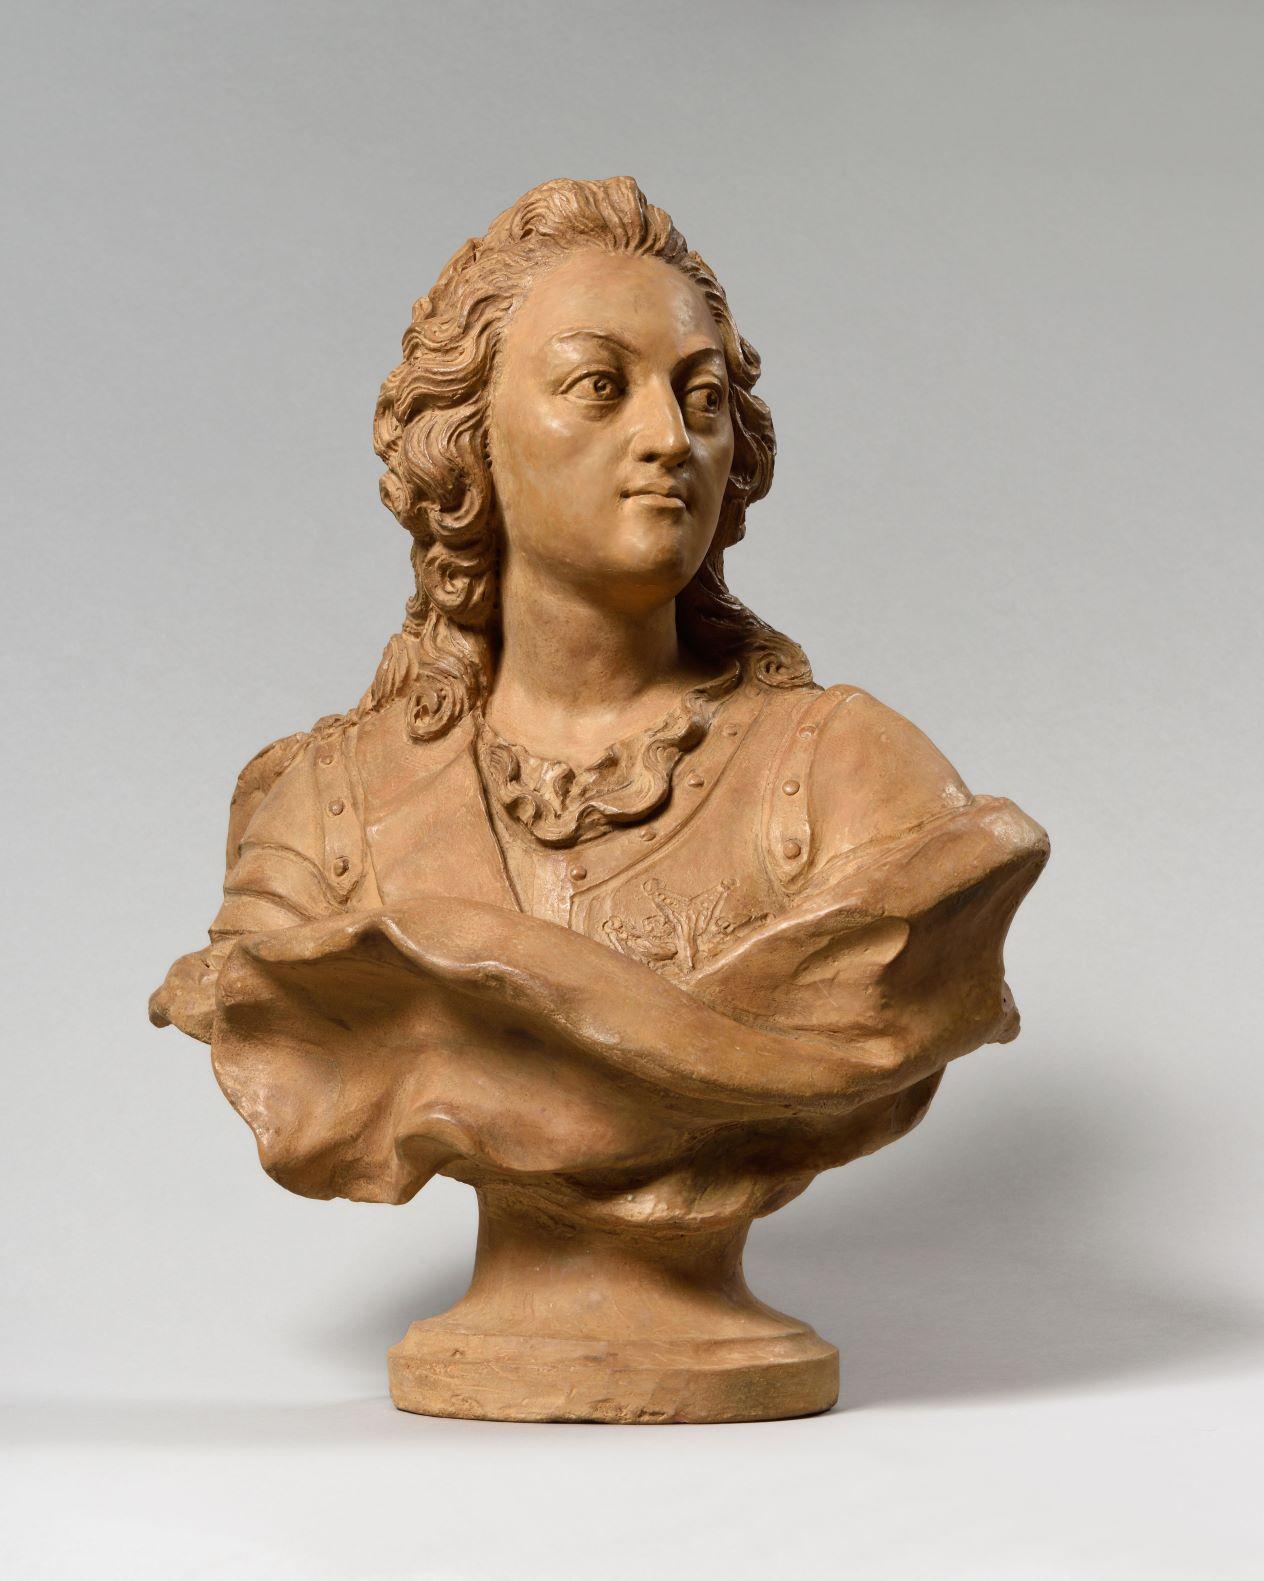 Exceptional Terracotta Bust of Louis XV by Pierre Lucas, France, mid-18th century
Pierre LUCAS 
(TOULOUSE, 1692 - TOULOUSE, 1752)
Louis Xv, Terracotta Bust
Dimensions: Hight 45 Cm – Width 40 Cm (17 ¾ In - 15 ¾ In)
Signed On The Back Of The